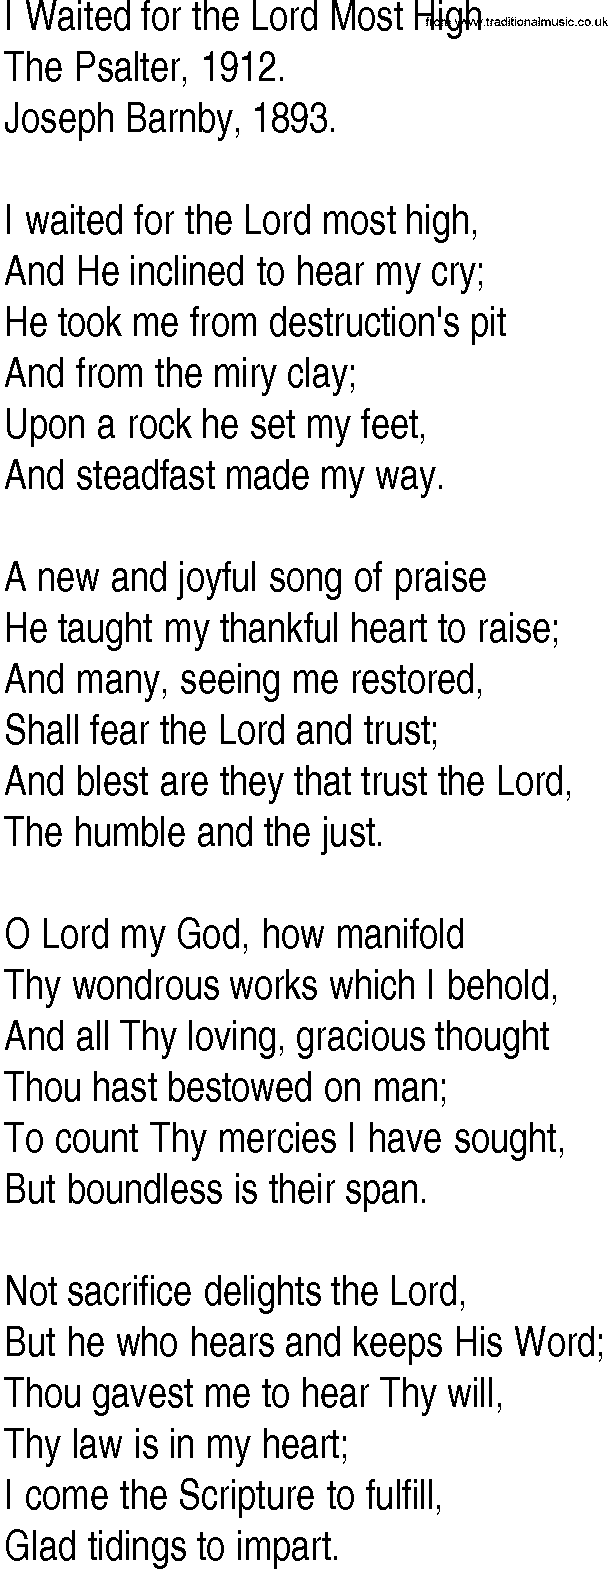 Hymn and Gospel Song: I Waited for the Lord Most High by The Psalter lyrics